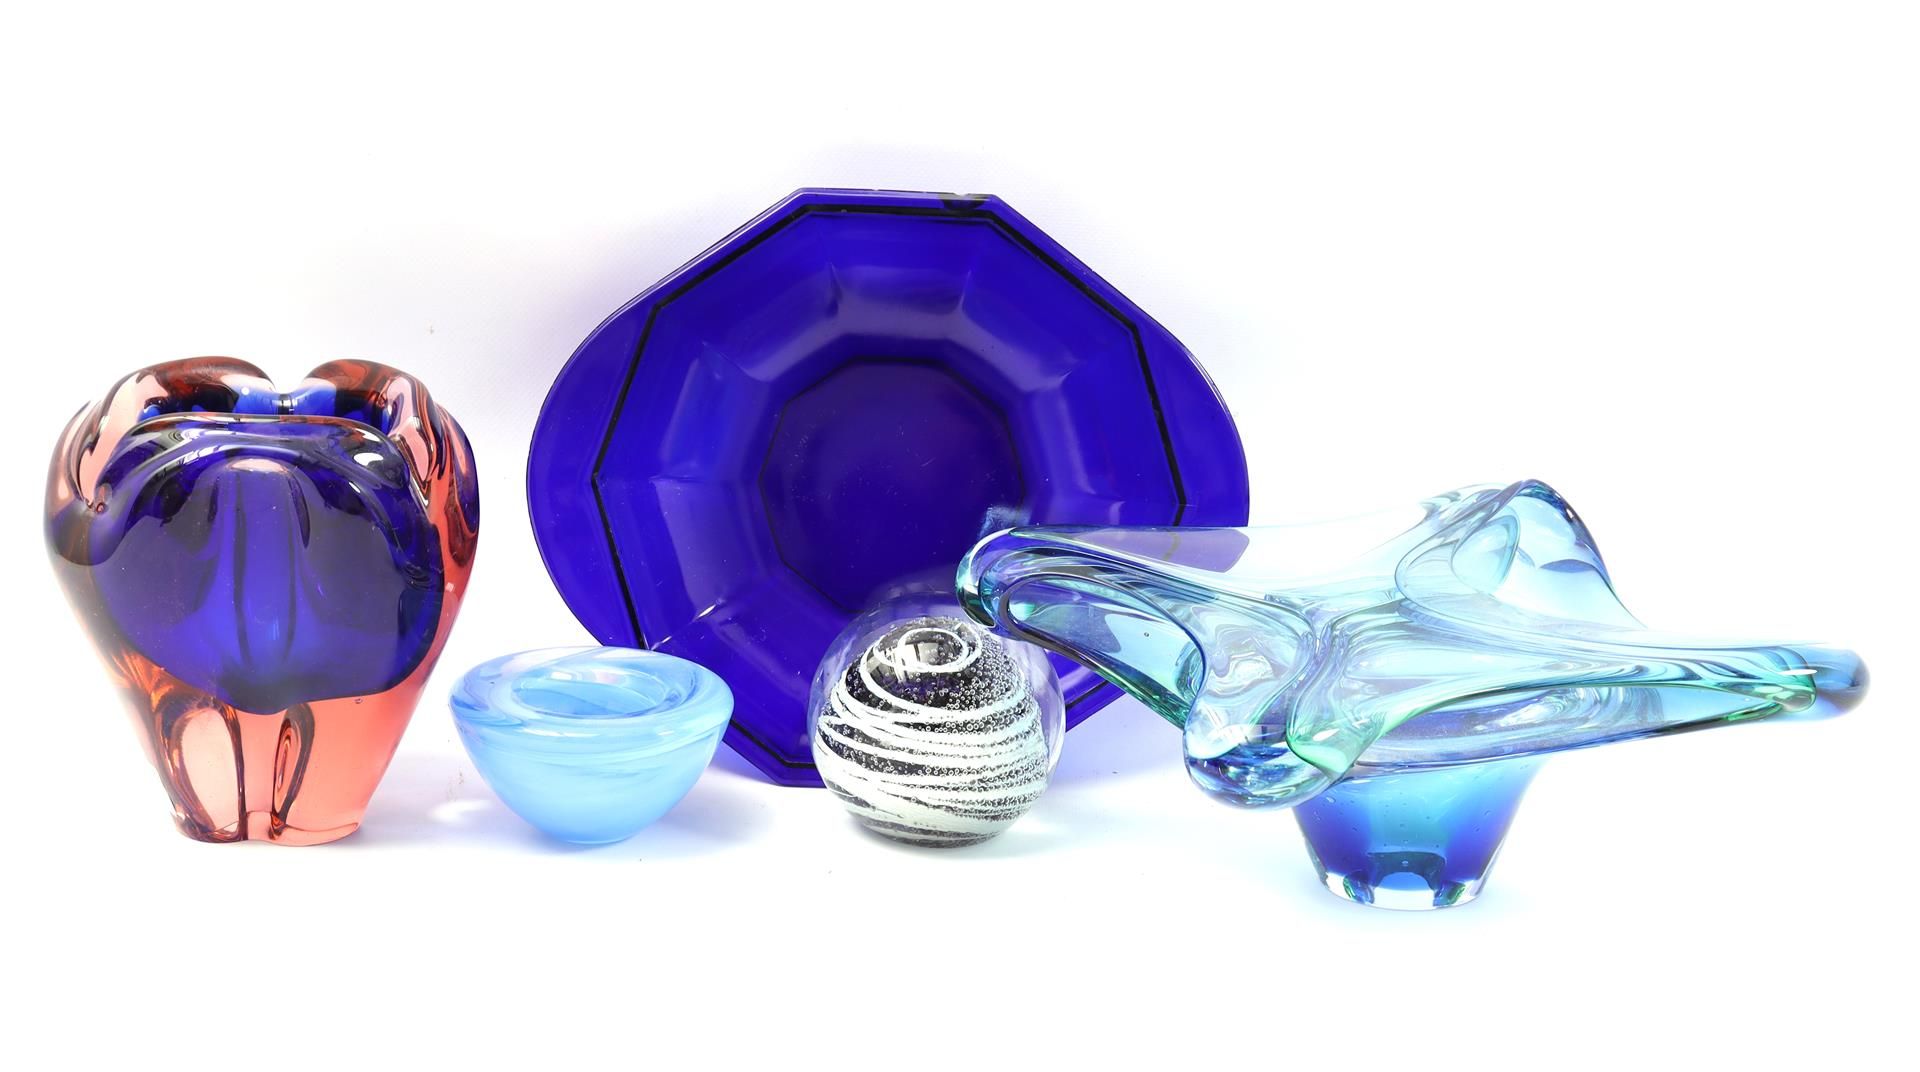 5 various glass objects